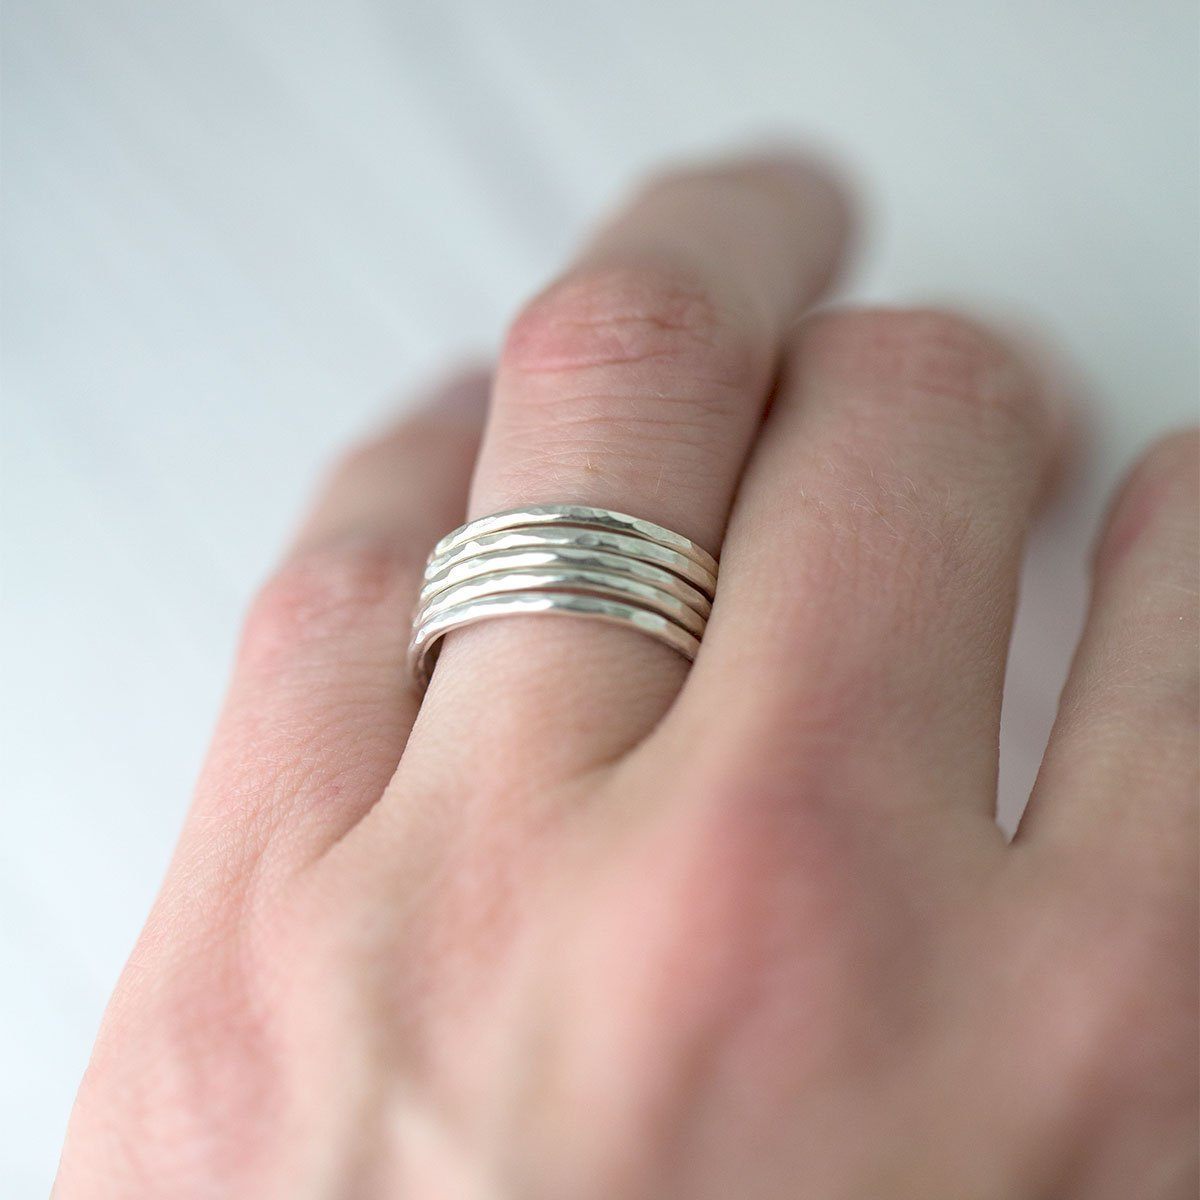 Slim Hammered Ring - Sterling Silver - Handmade Jewelry by Burnish